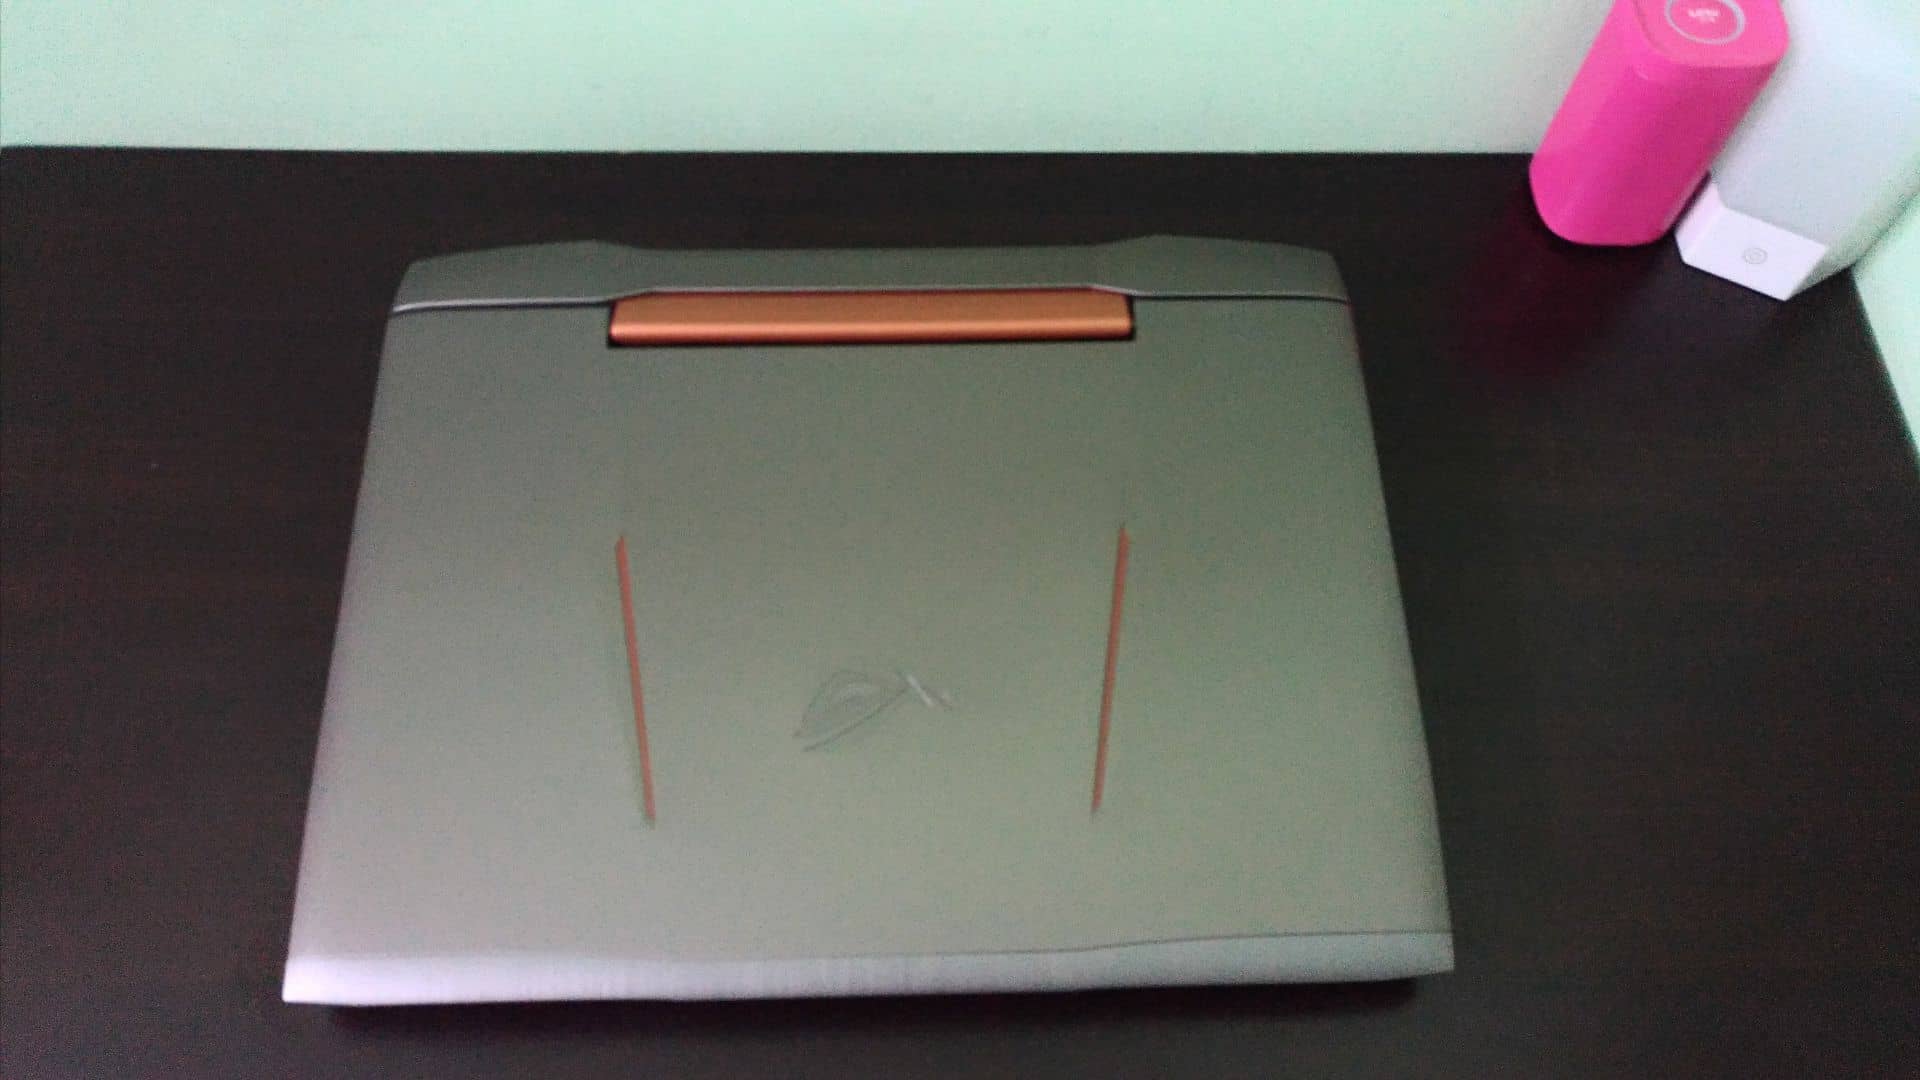 Asus ROG G752VY Review - The Mother and Father of All Gaming Notebooks! - 5